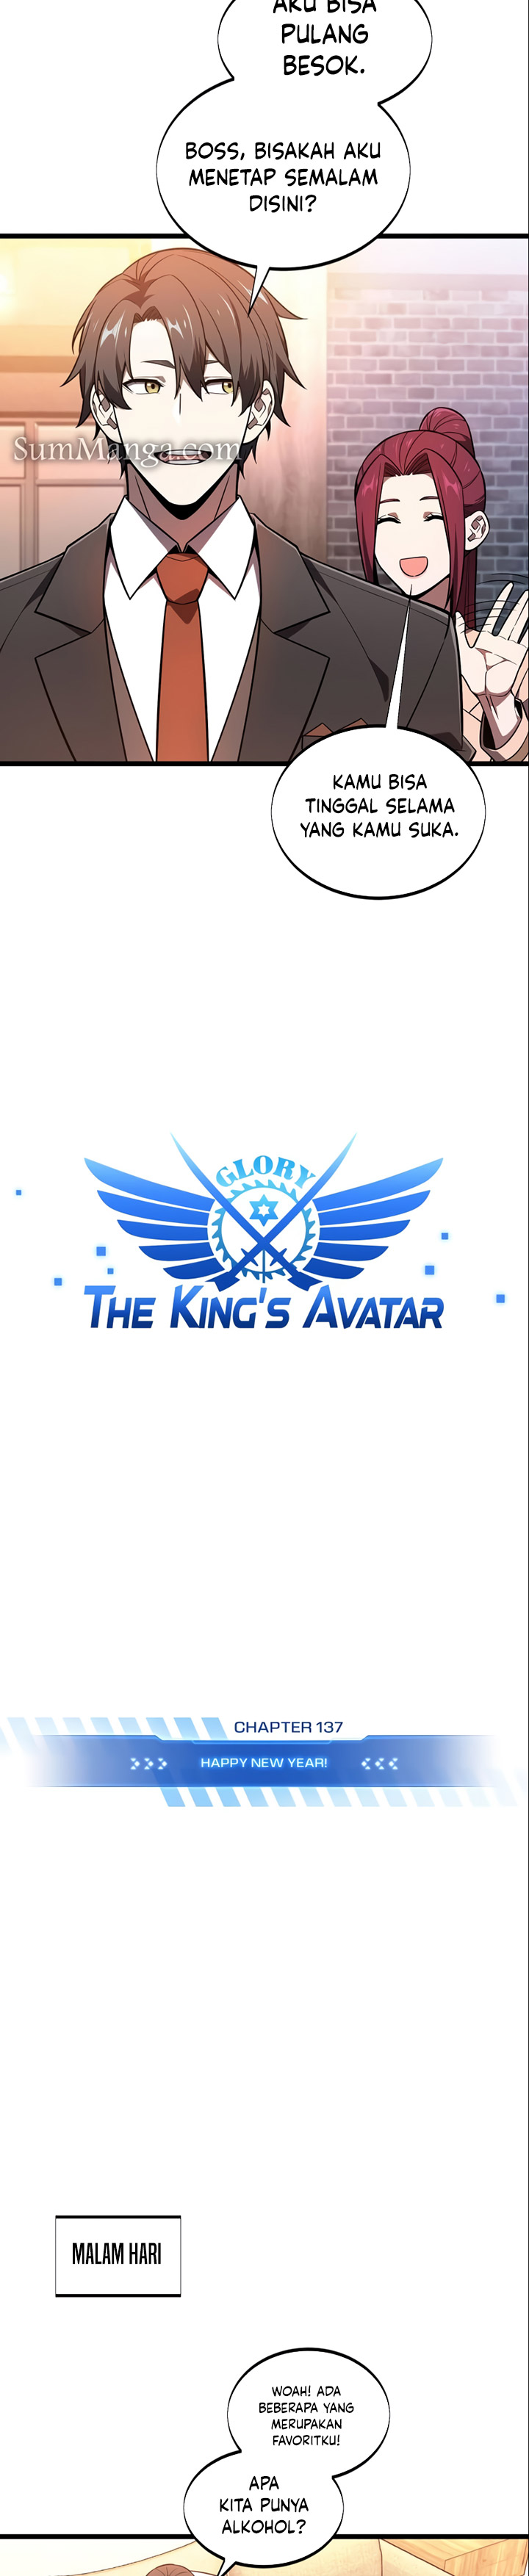 The King’s Avatar (2020) Chapter 137